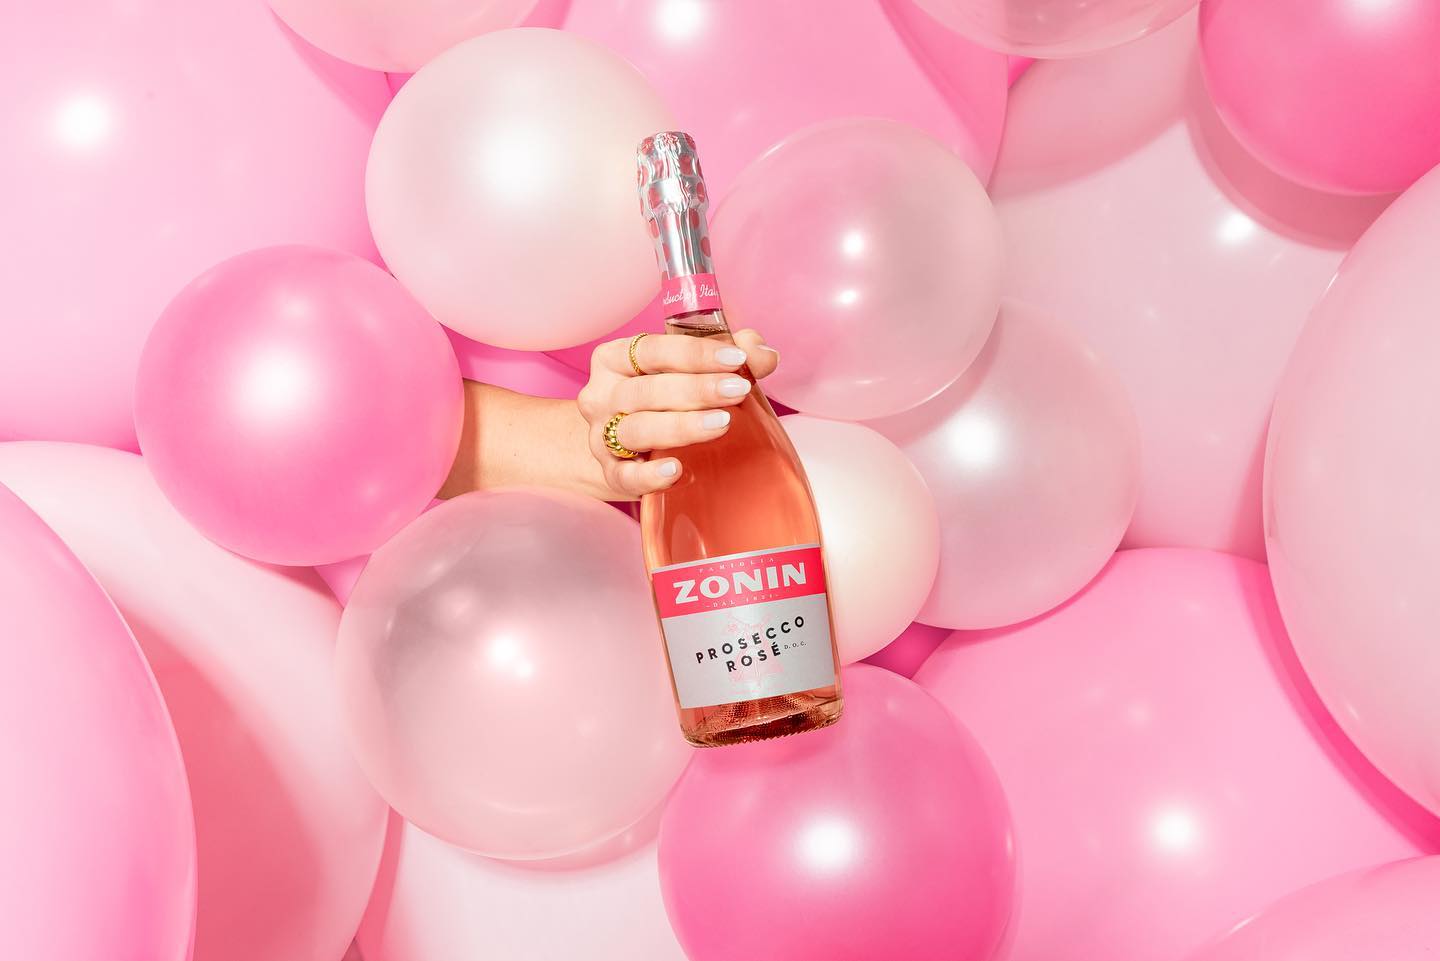 Surprise!🥳 Is it someone’s birthday out there? We got the perfect gift for you💖⁣⁣
⁣⁣
⁣⁣
#ZoninProsecco #Zonin #Prosecco #roseprosecco #newlook #sparkles #bubbles #wineglass #makeitpop